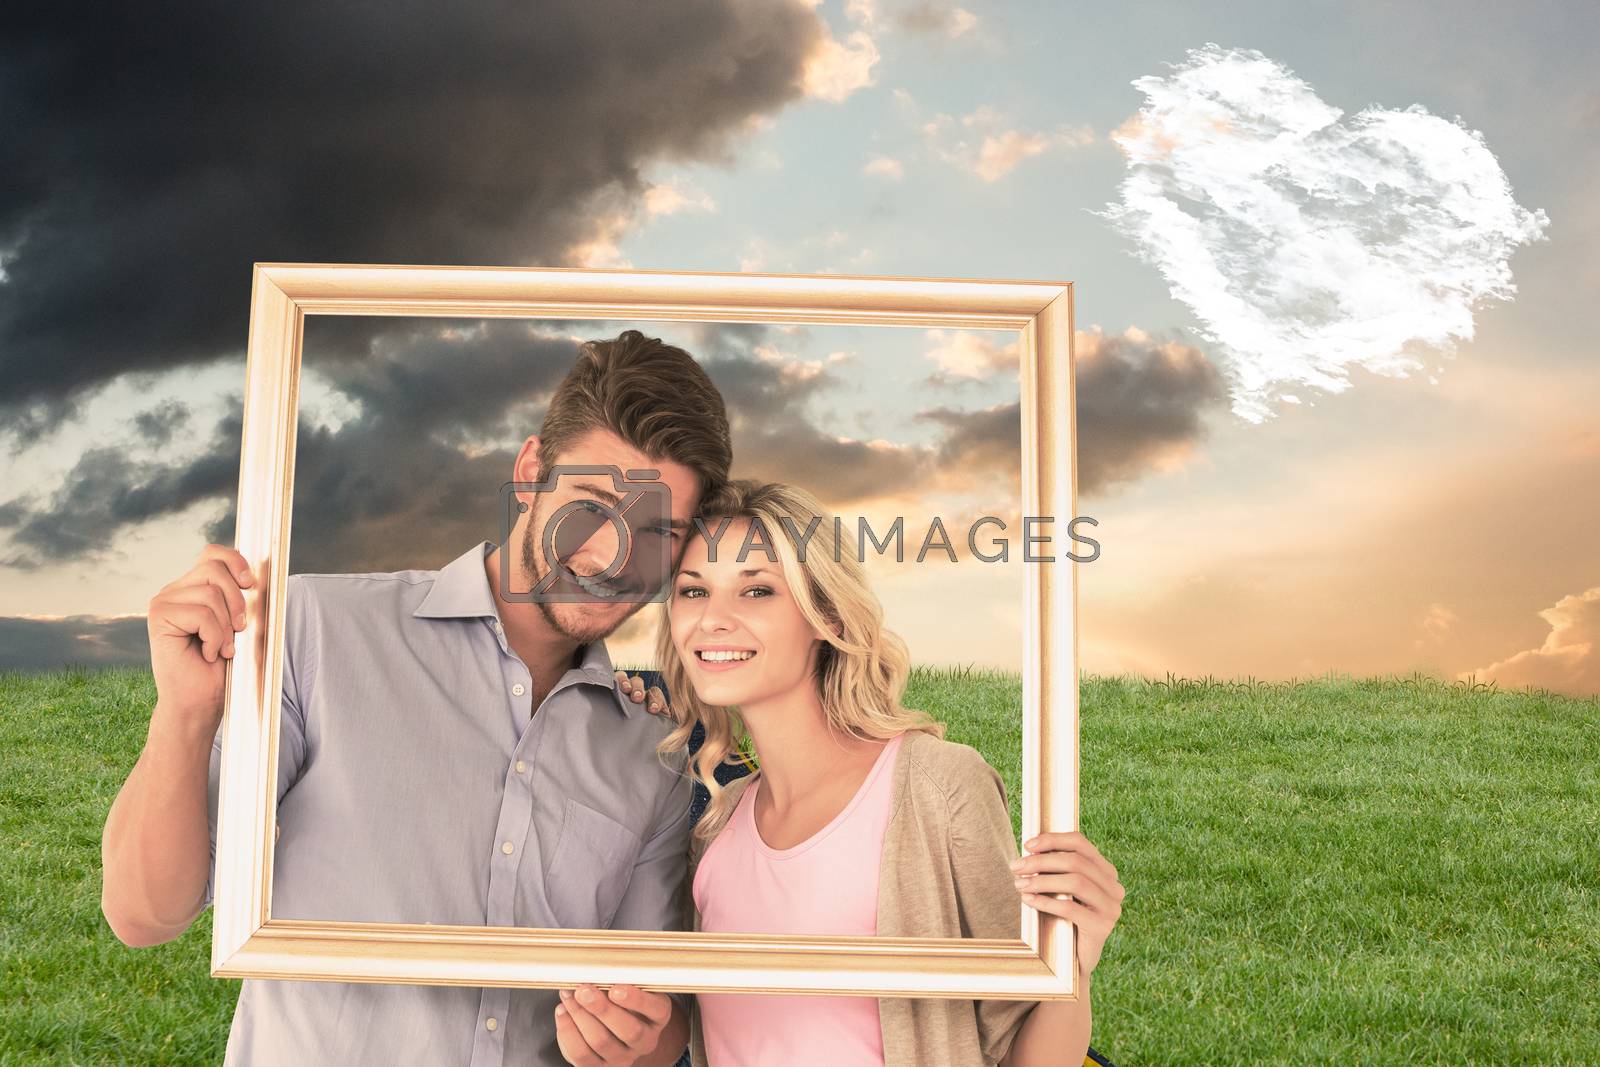 Royalty free image of Composite image of attractive young couple holding picture frame by Wavebreakmedia